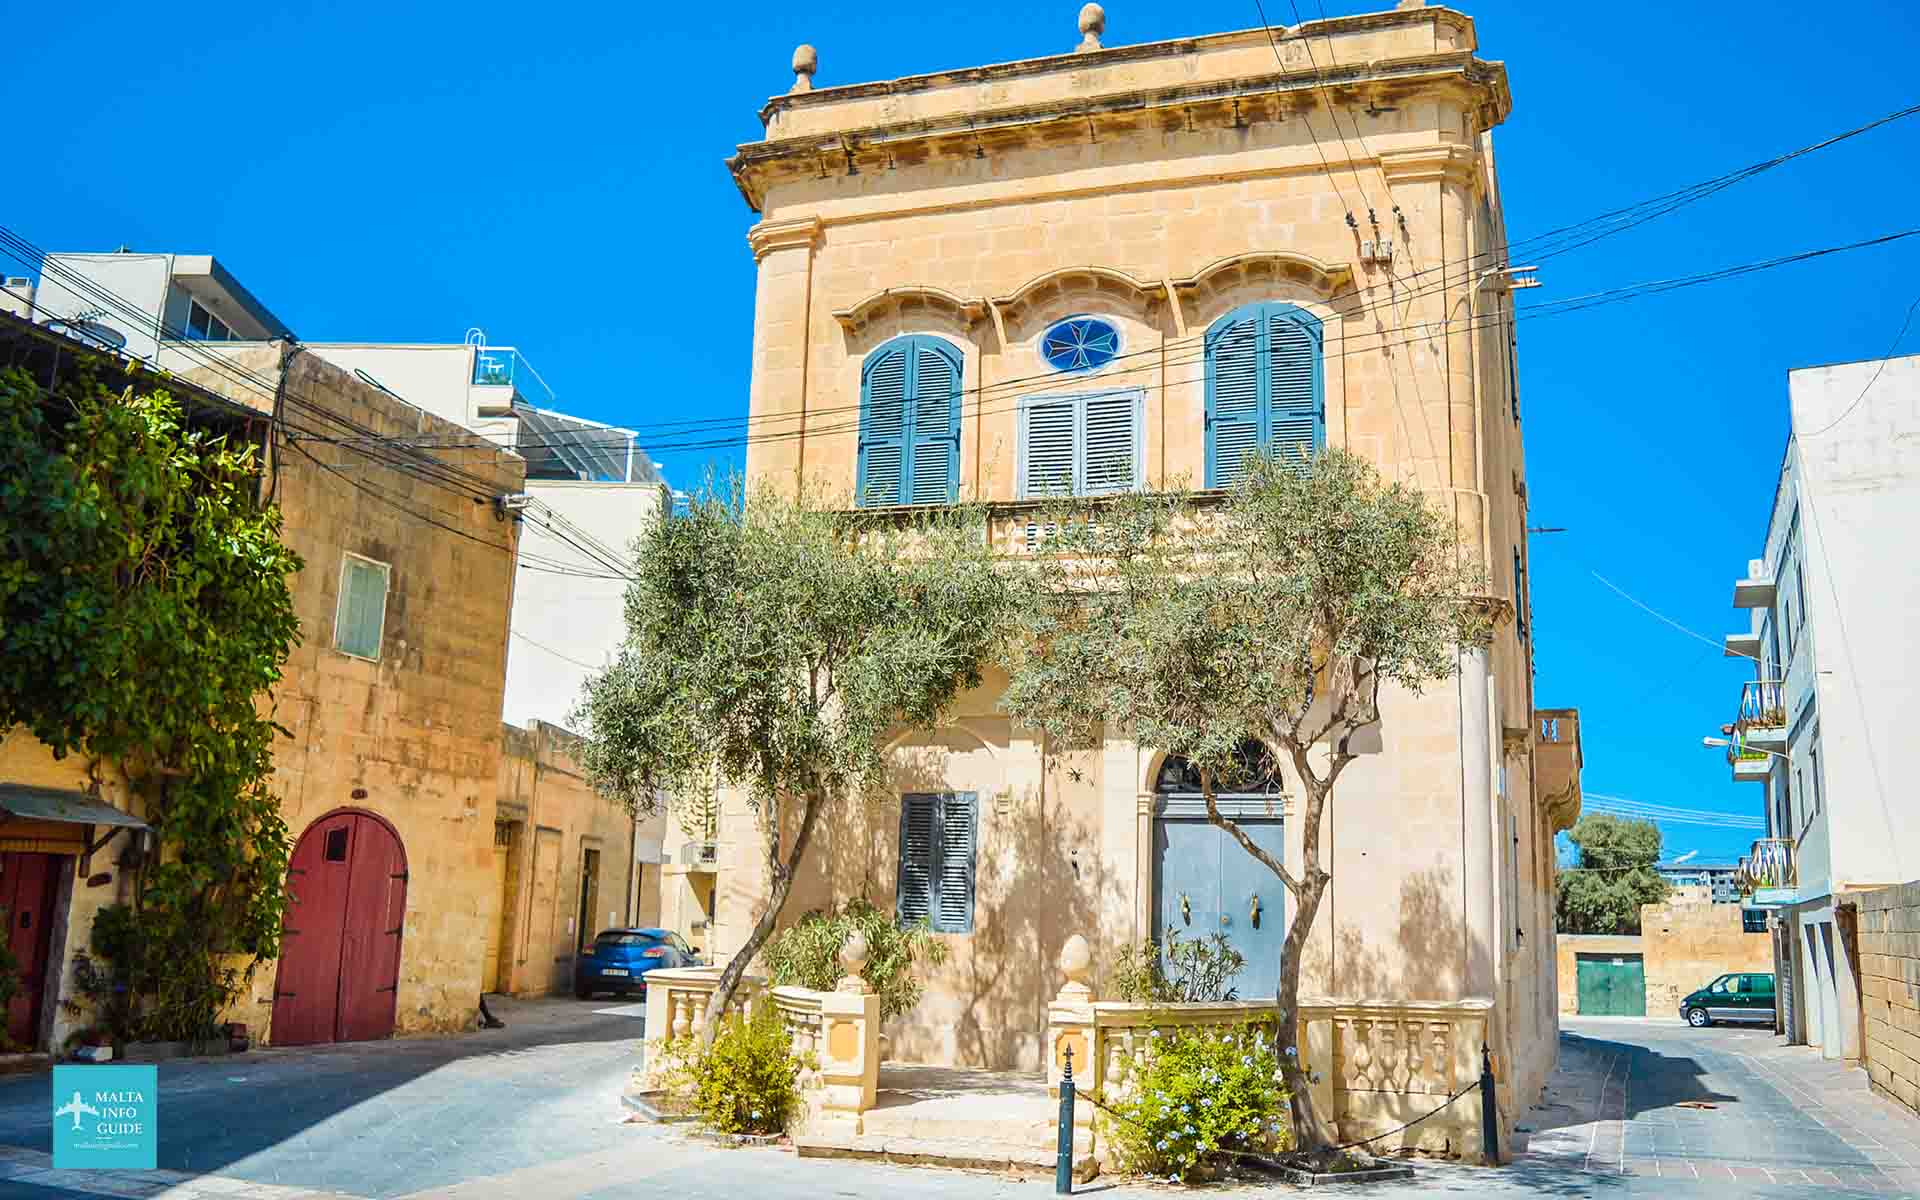 Townhouse in Mosta.